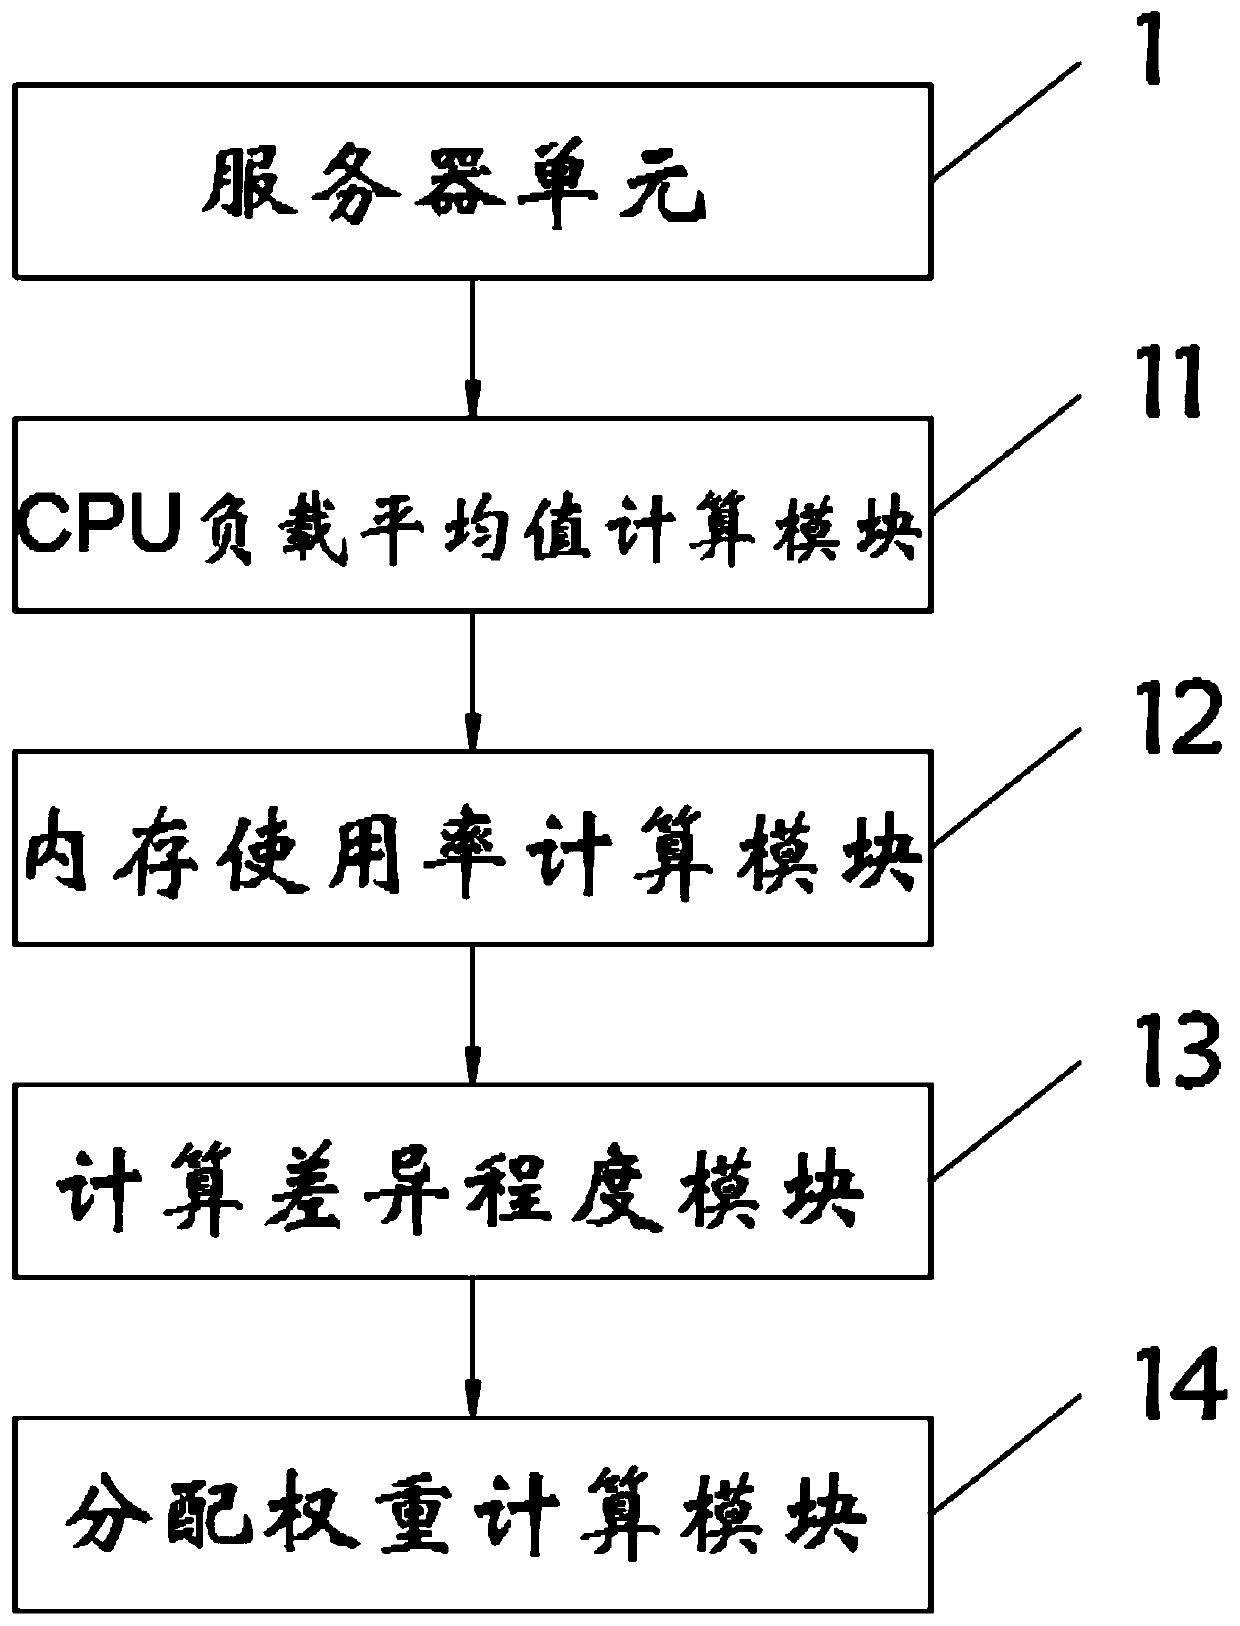 SDN-based load balancing implementation system and method